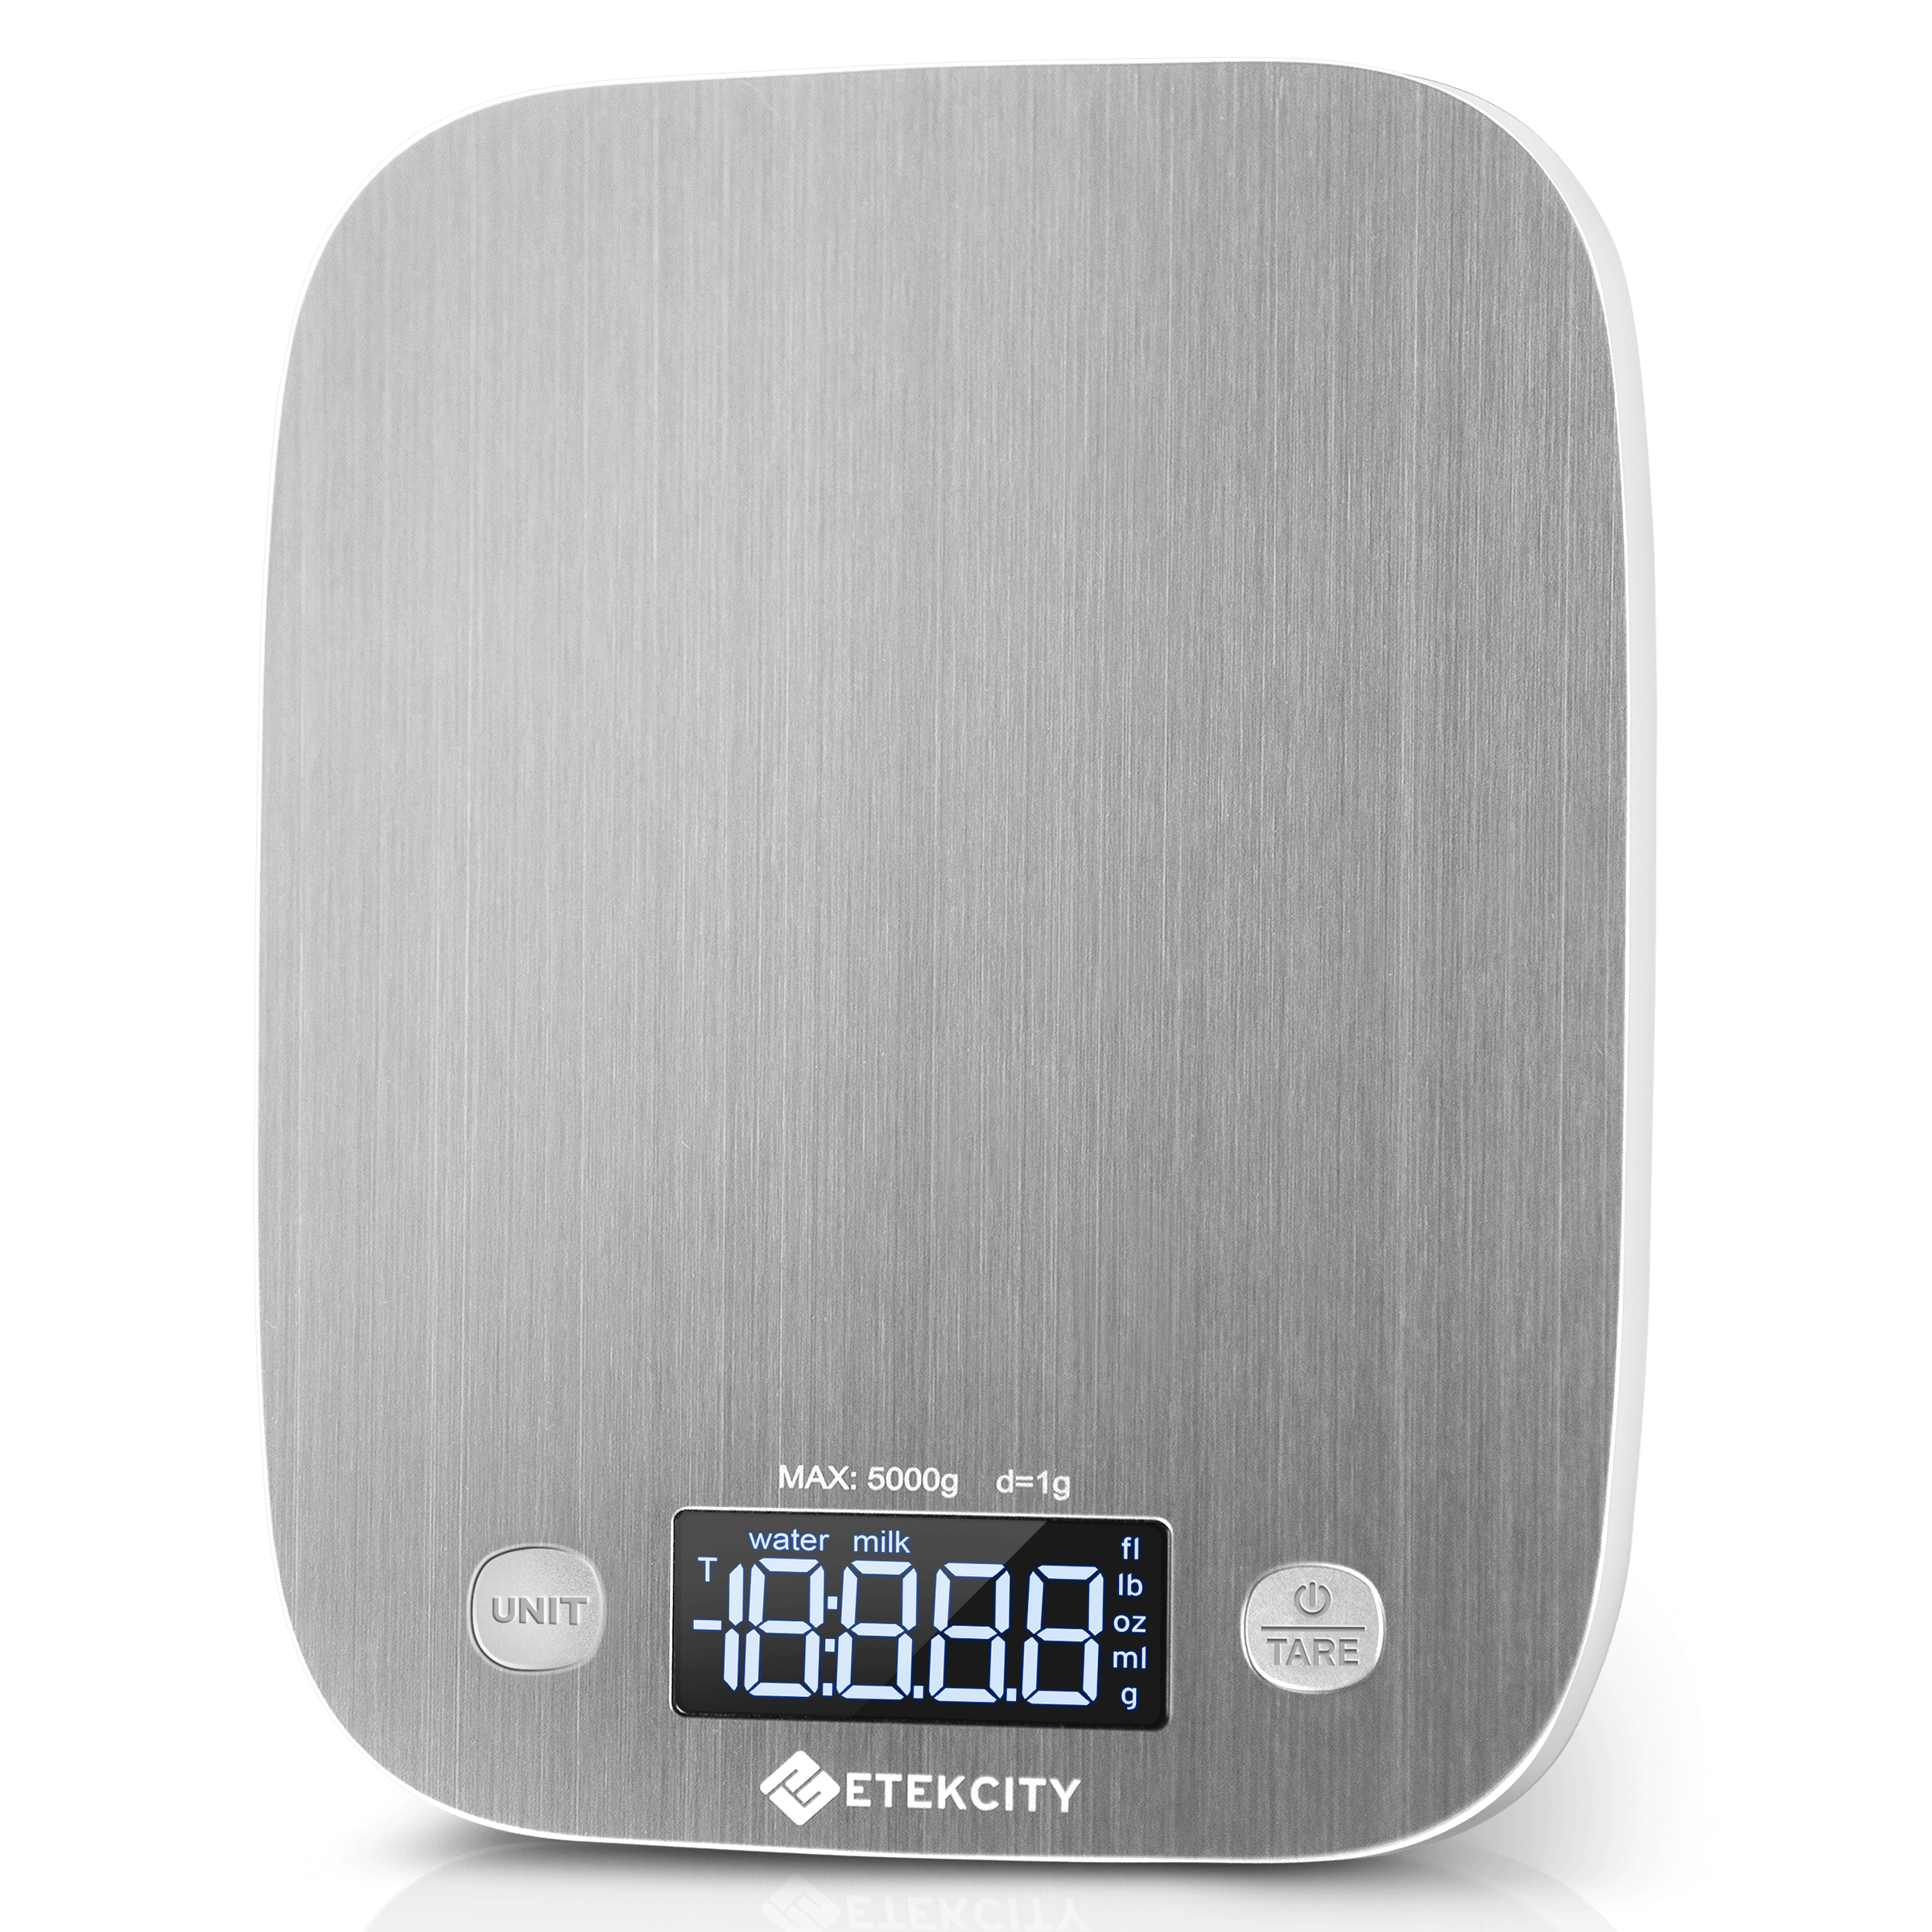  Etekcity Food Kitchen Scale, Digital Weight Grams and